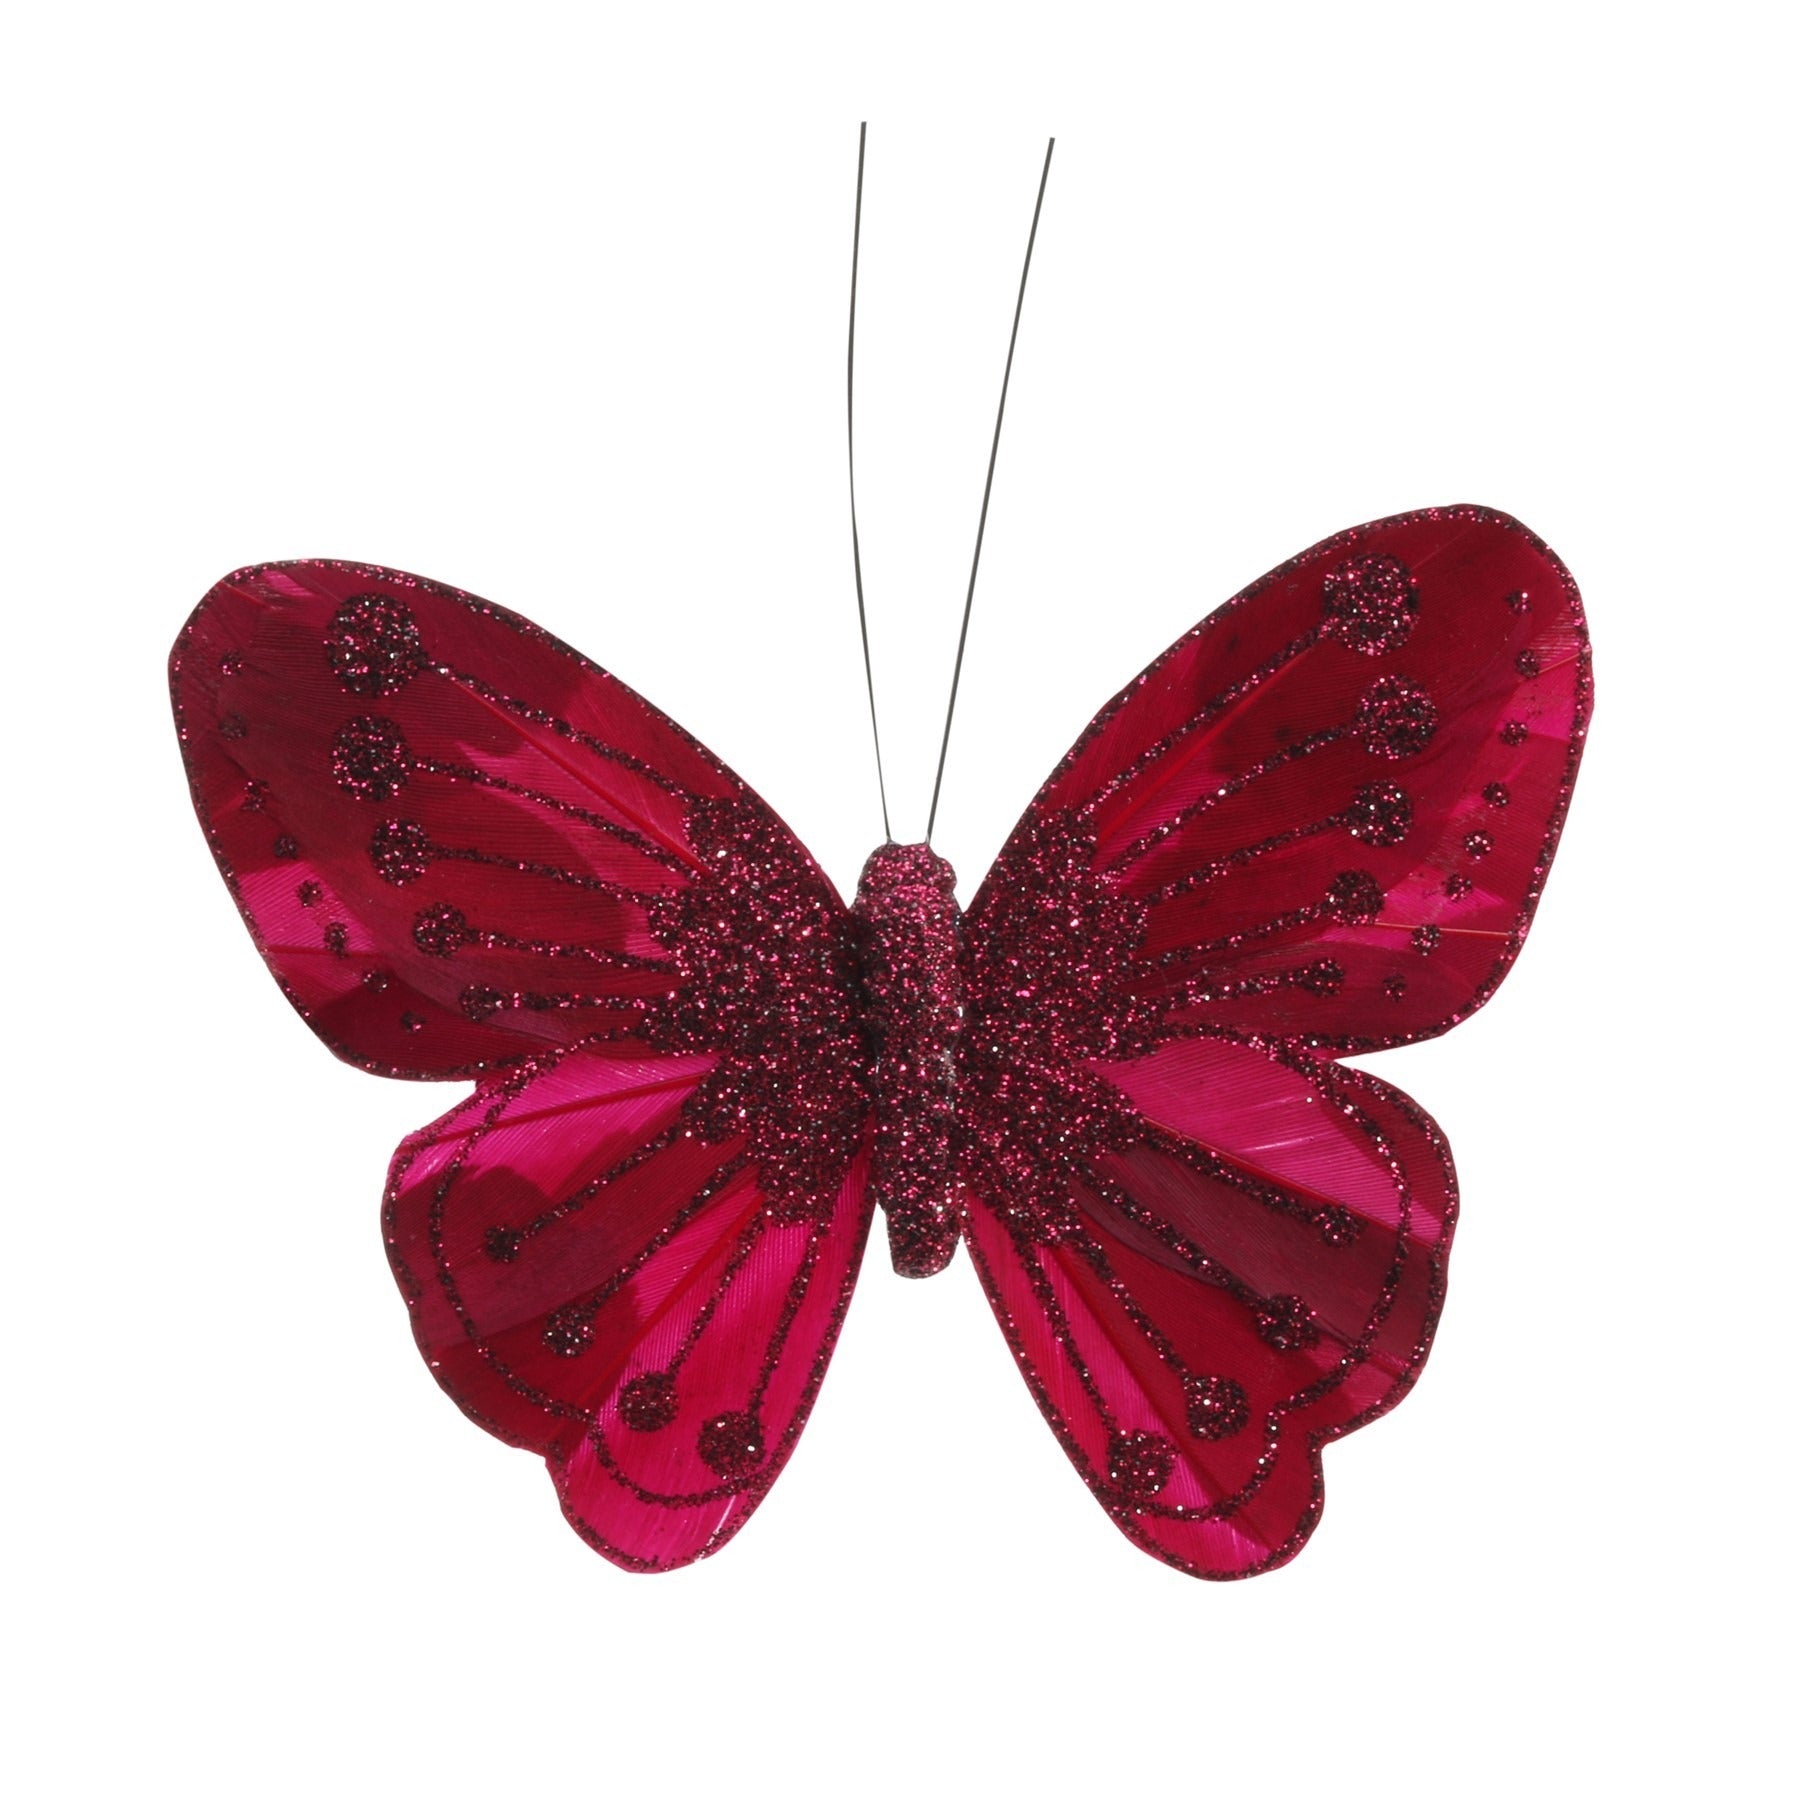 View 115cm Burgundy Feather Glitter Butterfly Pack of 12 information